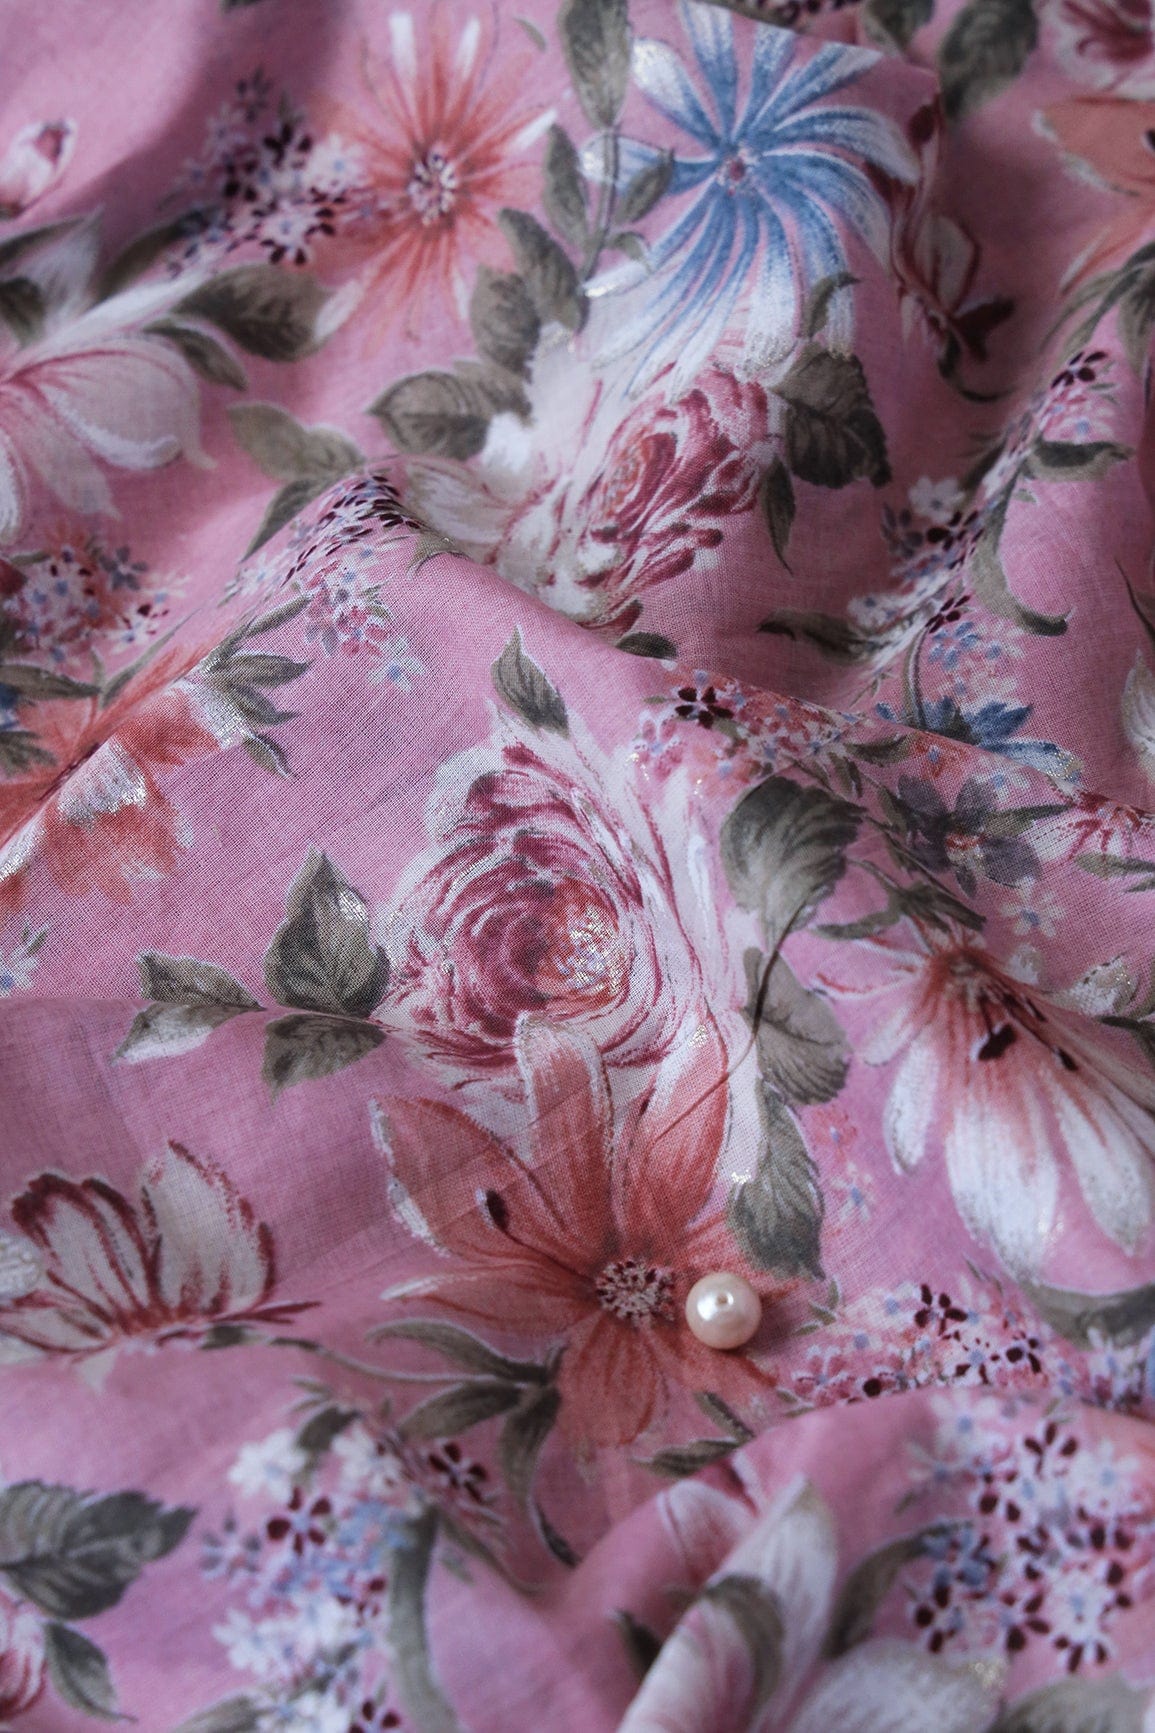 doeraa Prints Pastel Pink And White Color Floral Foil Print On Pure Mul Cotton Fabric